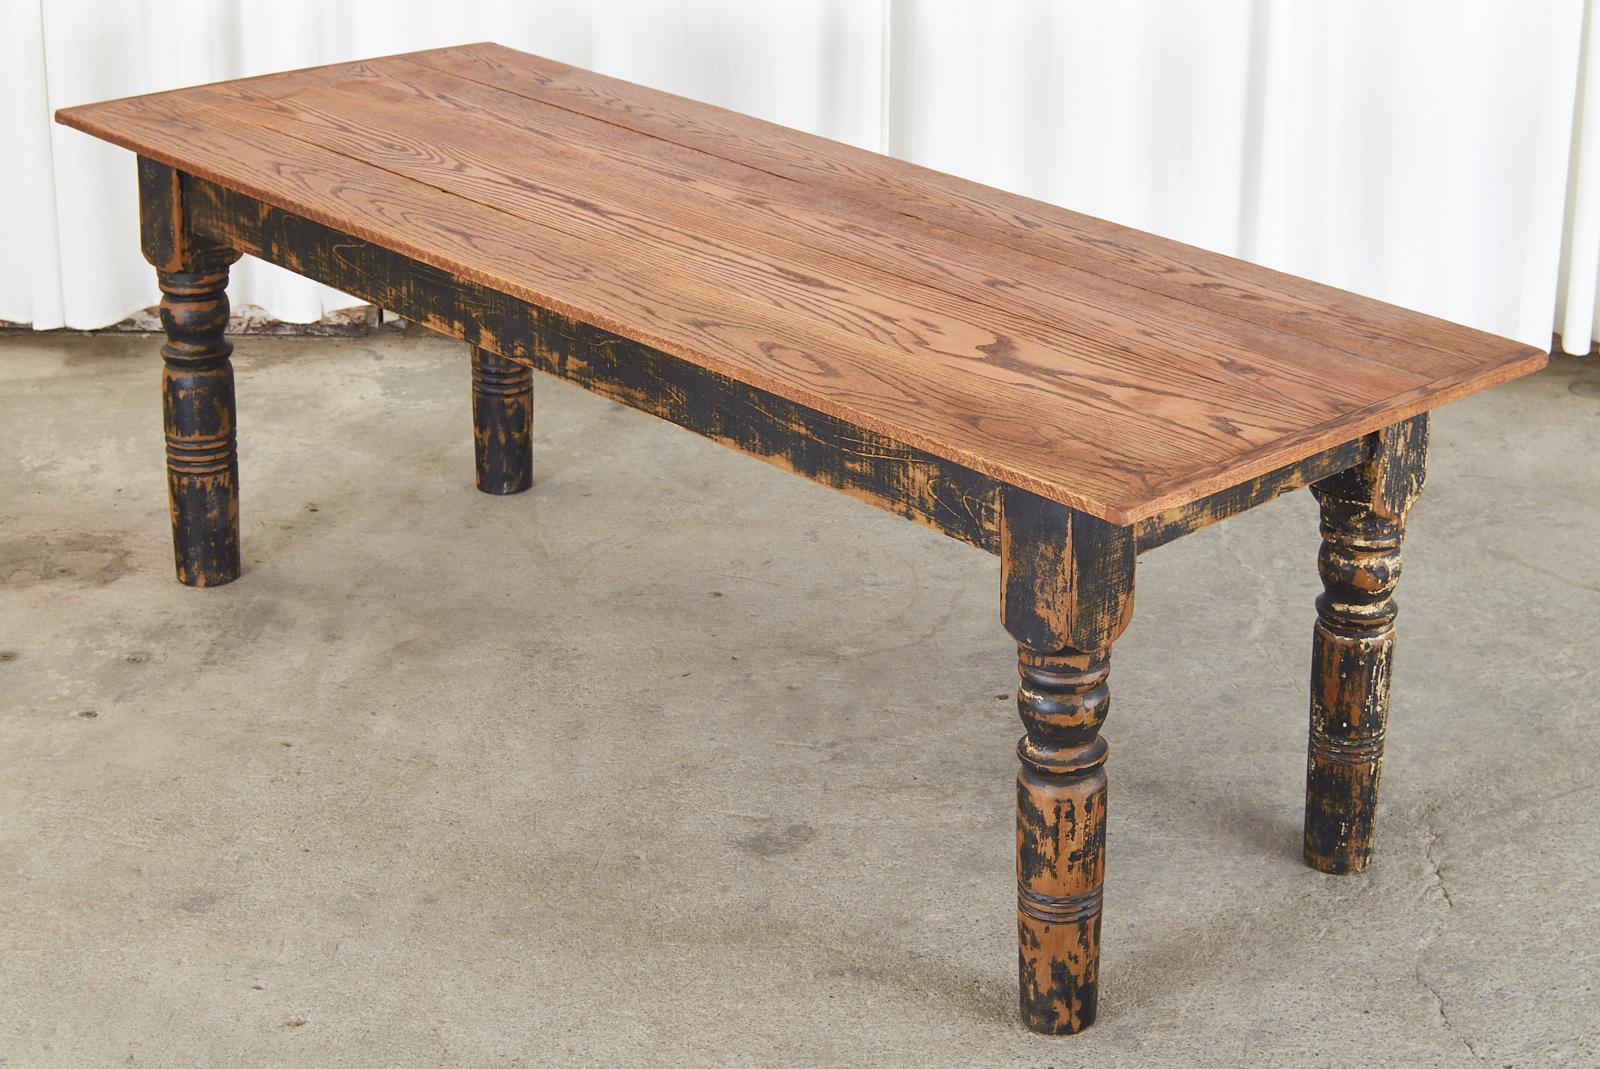 Rustic American country farmhouse dining table or harvest table featuring a 92 inch long oak plank top with bread board ends. The base is crafted from thick reclaimed painted pine boards and supported by massive 5 inch thick square legs with a